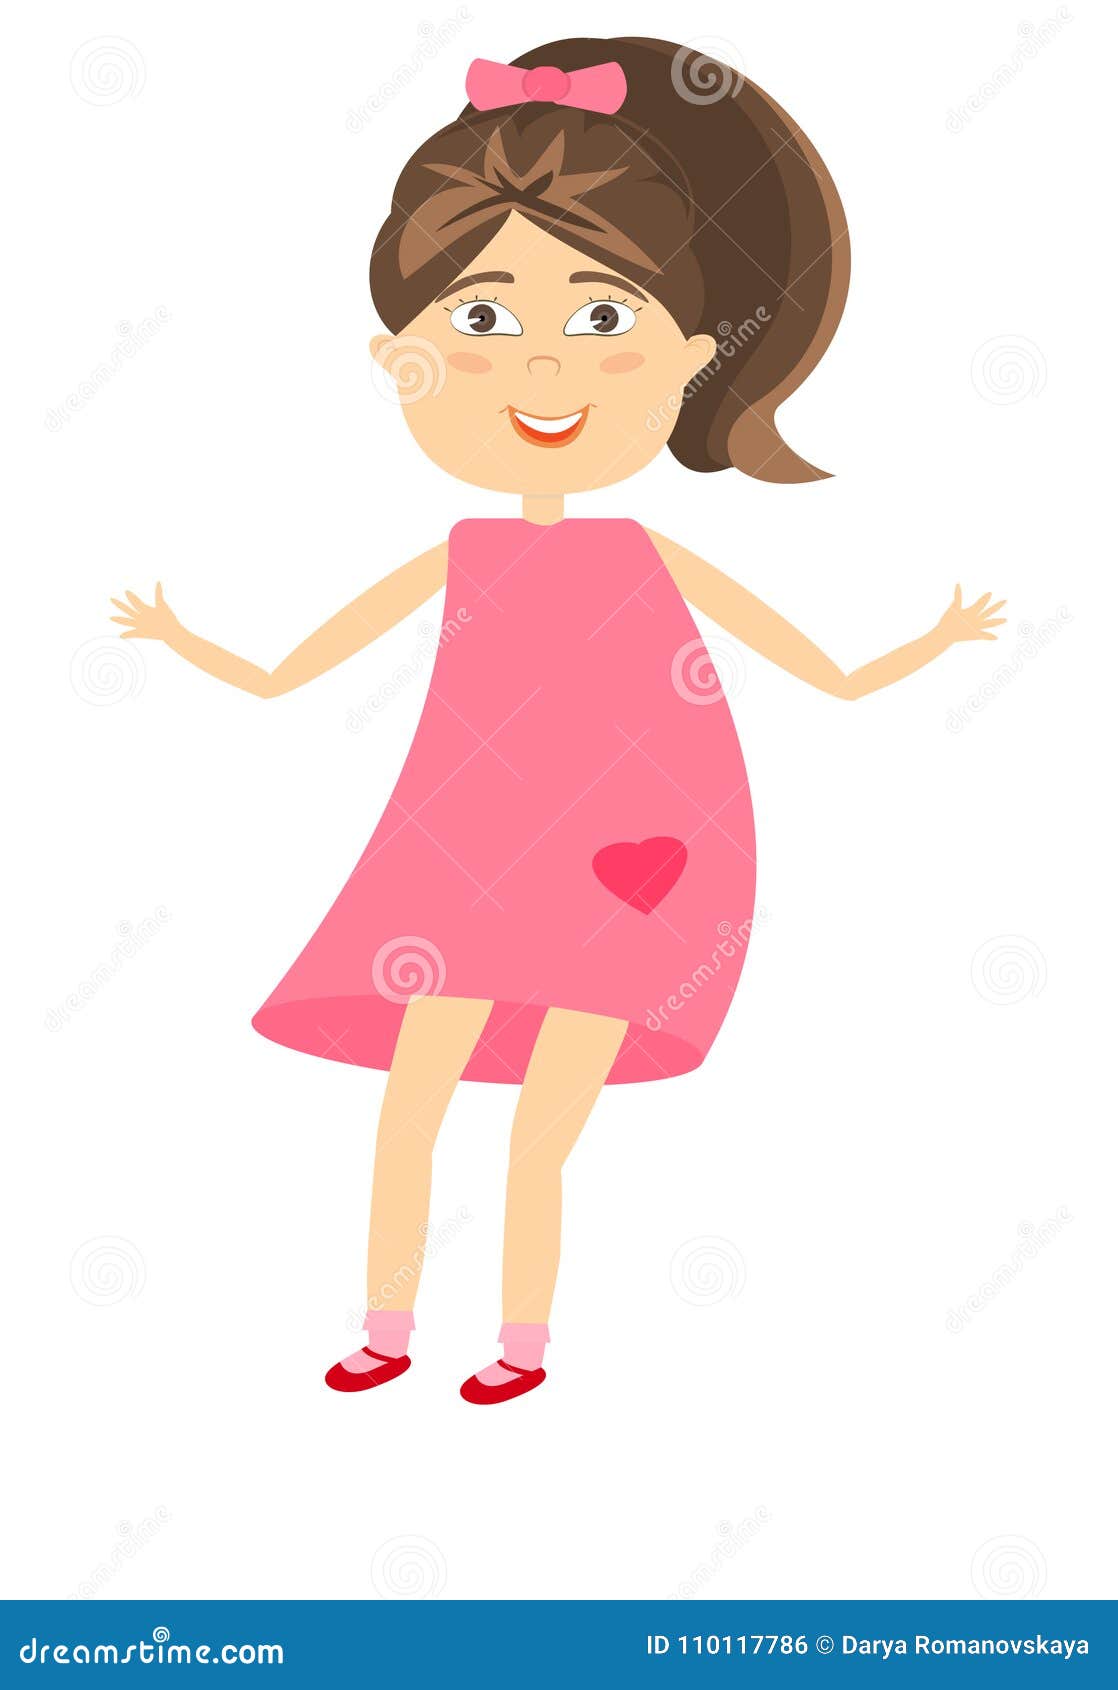 Girl in Pink Dress Jumping, Hovering in the Air. Stock Vector ...